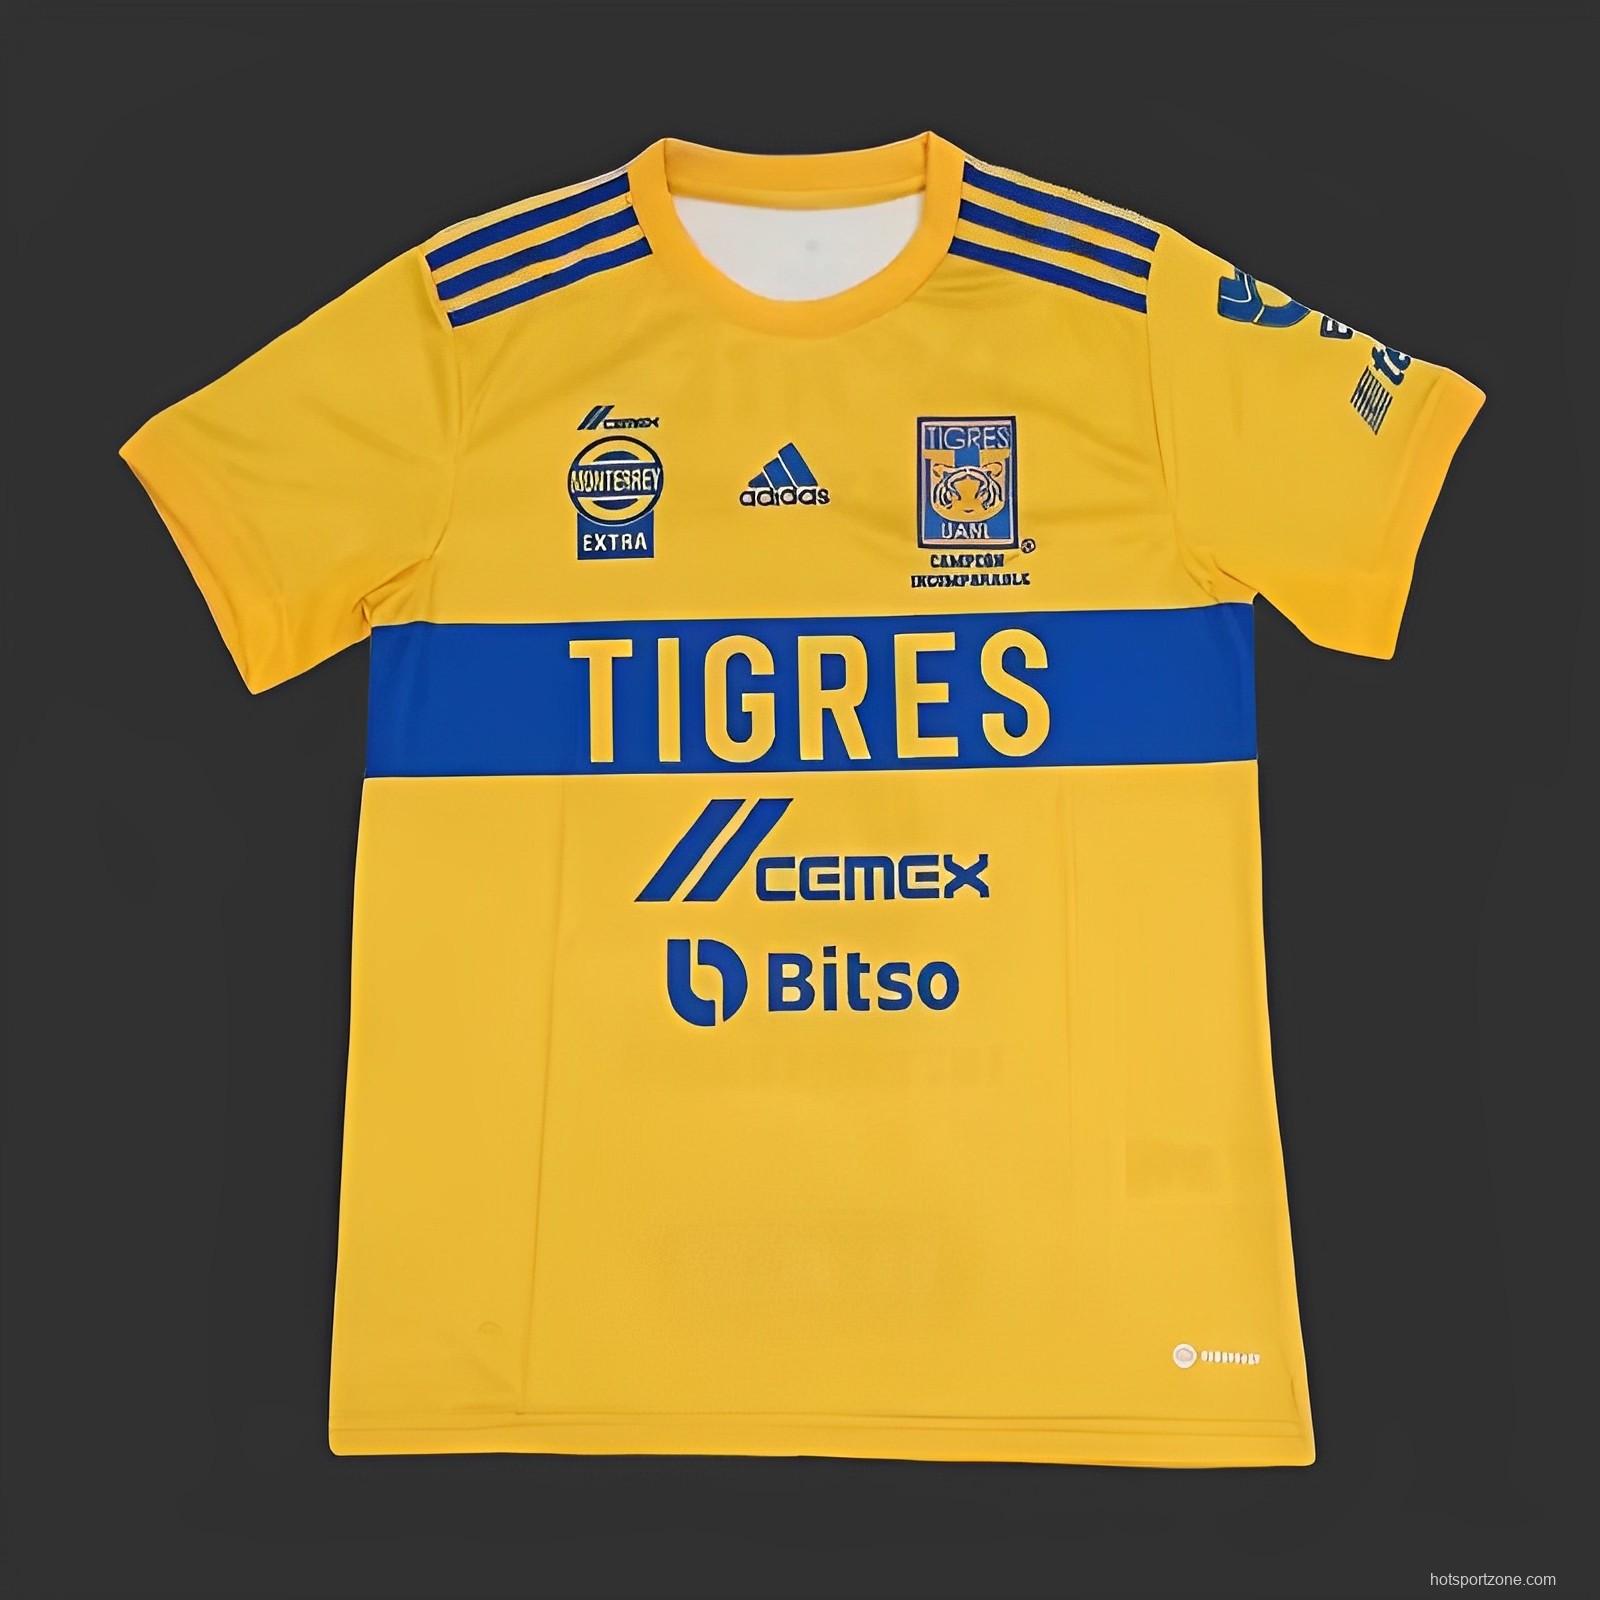 23/24 Tigres UANL Campeon Incomparable Home Jersey